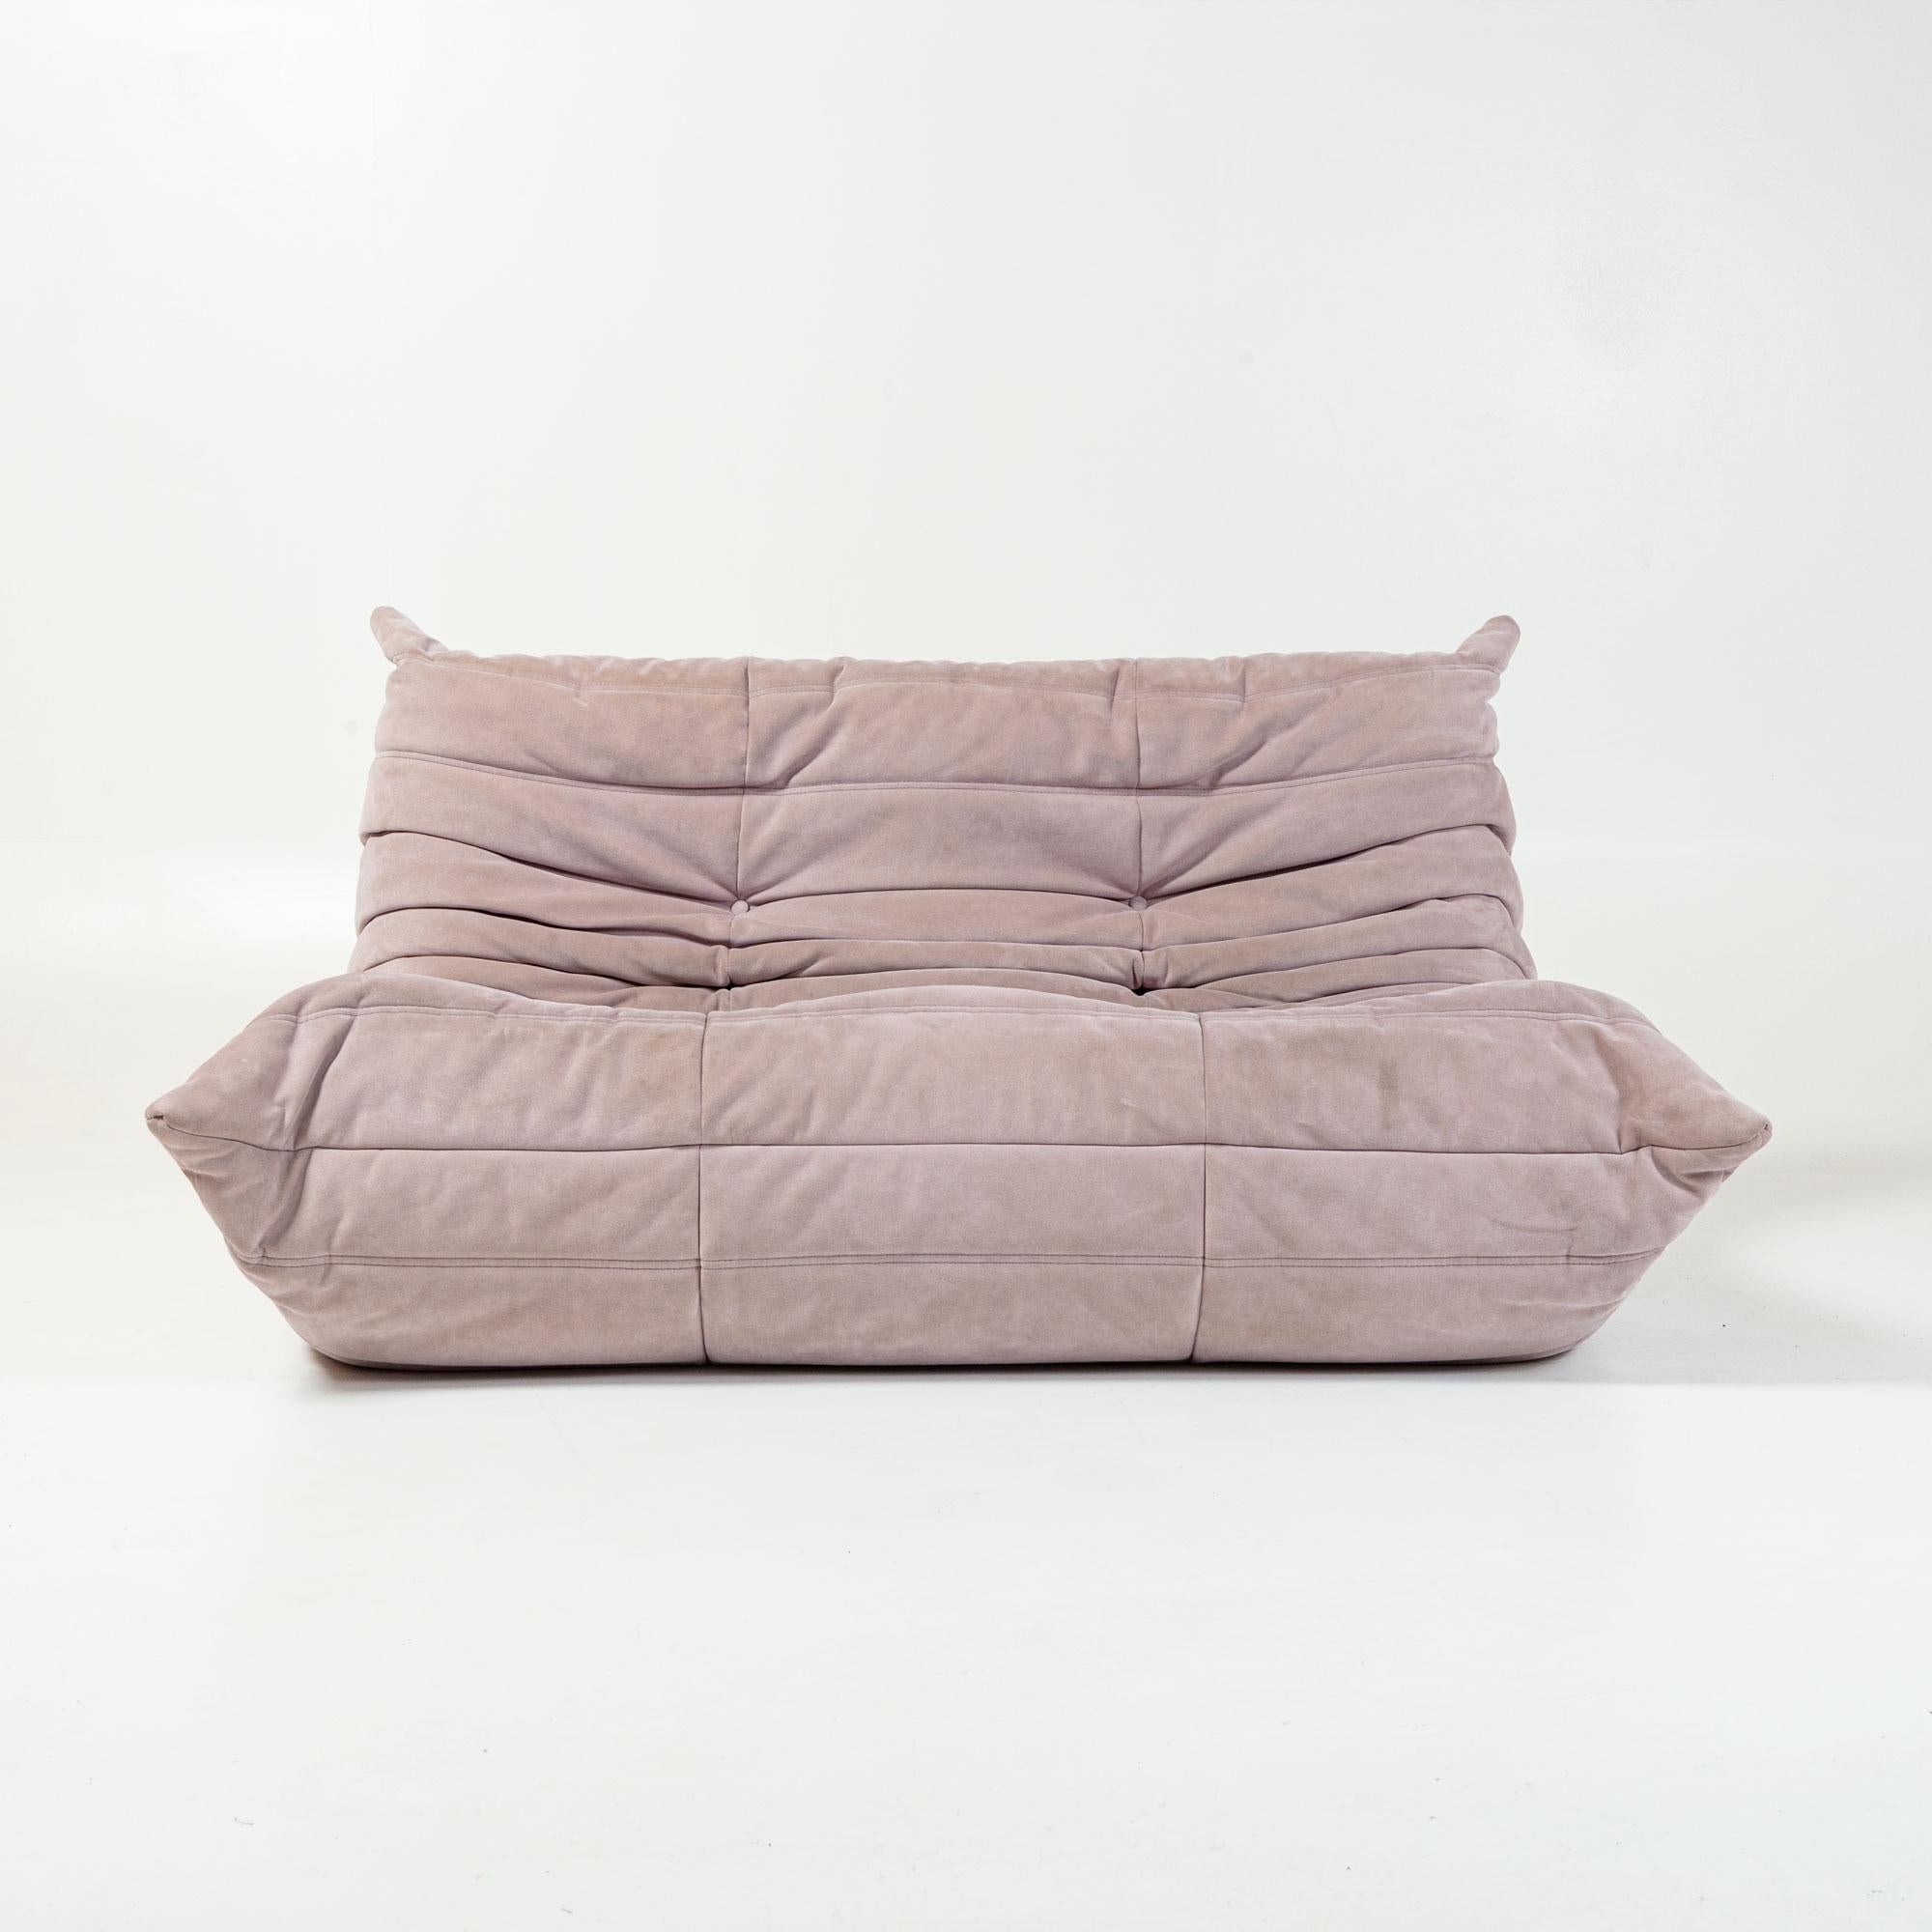 A Ligne Roset classic, Michel Ducaroy's Togo has been the ultimate in comfort and style for over forty years. The timeless collection features an ergonomic design with multiple density polyether foam construction and quilted covers, making each